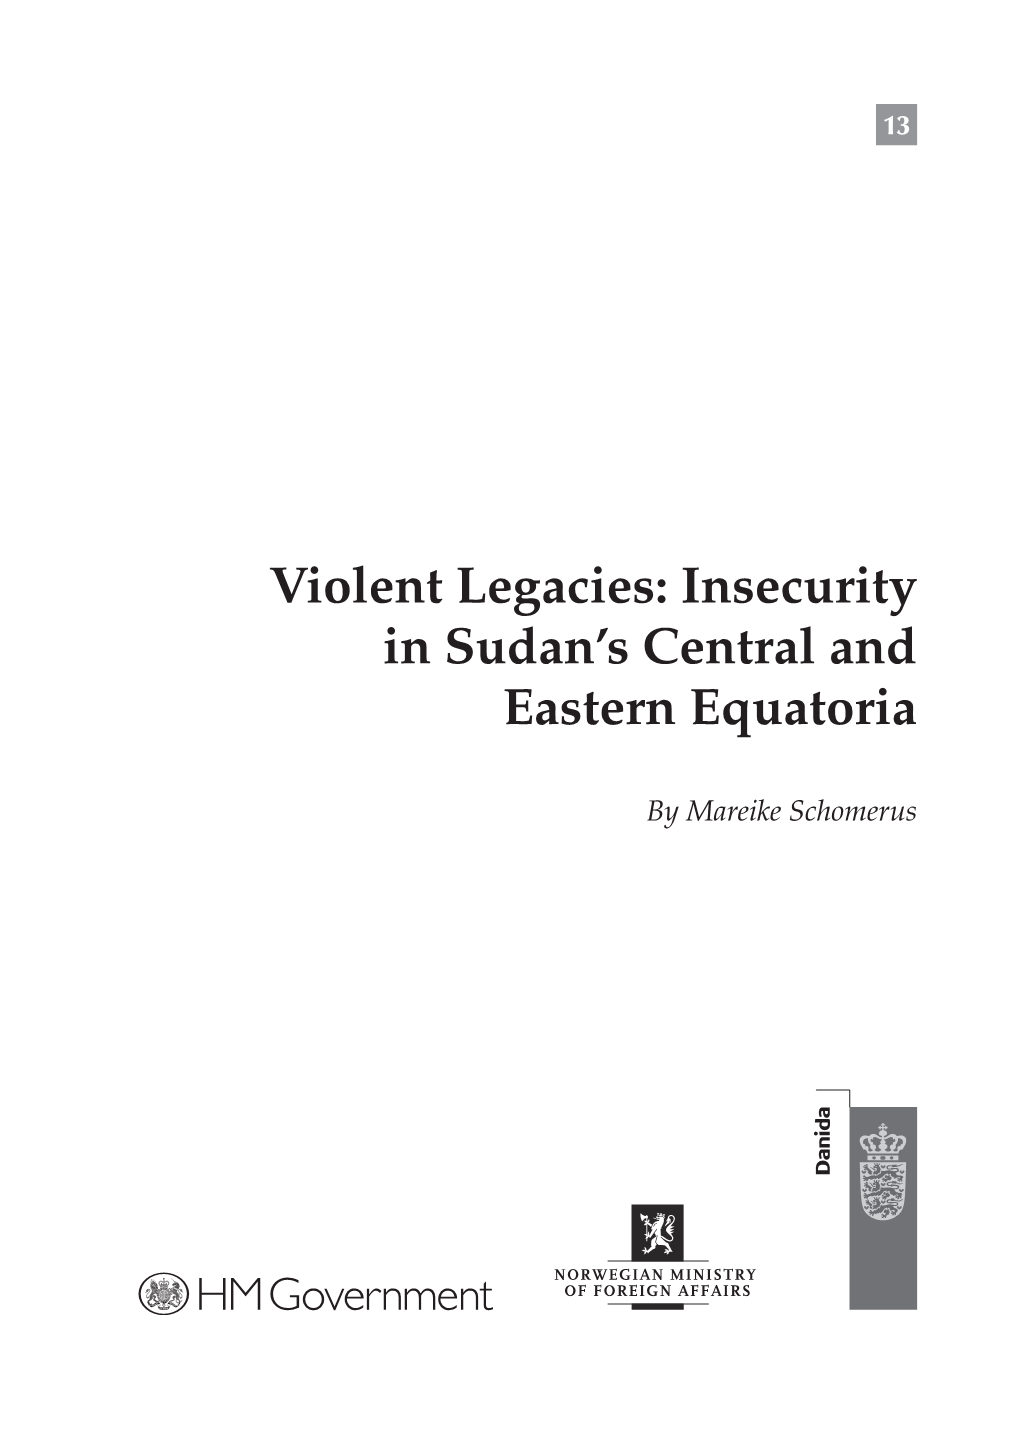 Violent Legacies: Insecurity in Sudan's Central and Eastern Equatoria